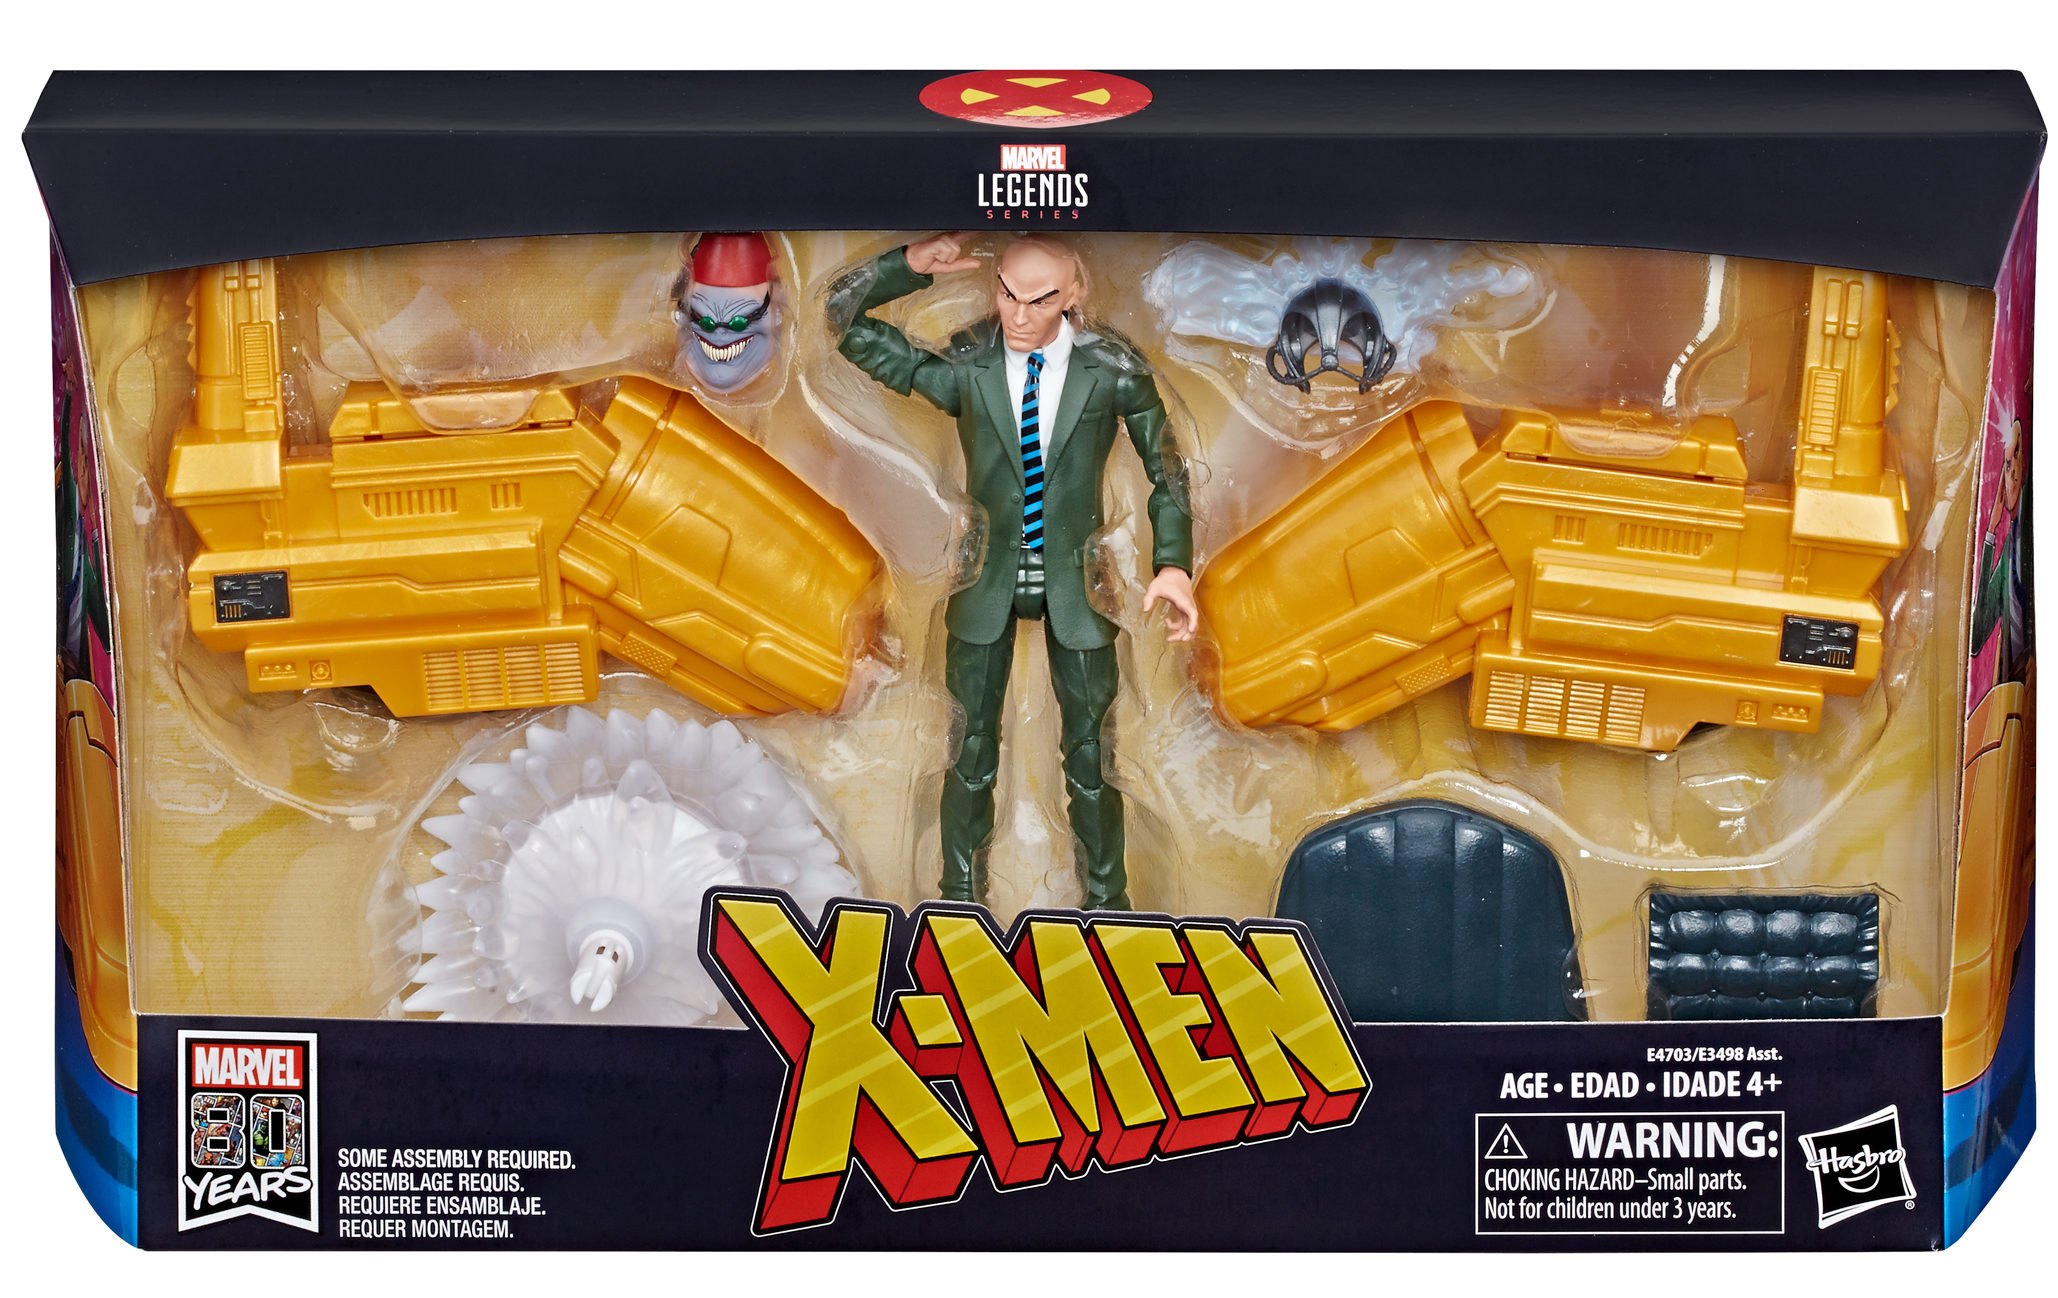 Hasbro: Marvel Legends Vehicles Professor X and Scooter Deadpool Review